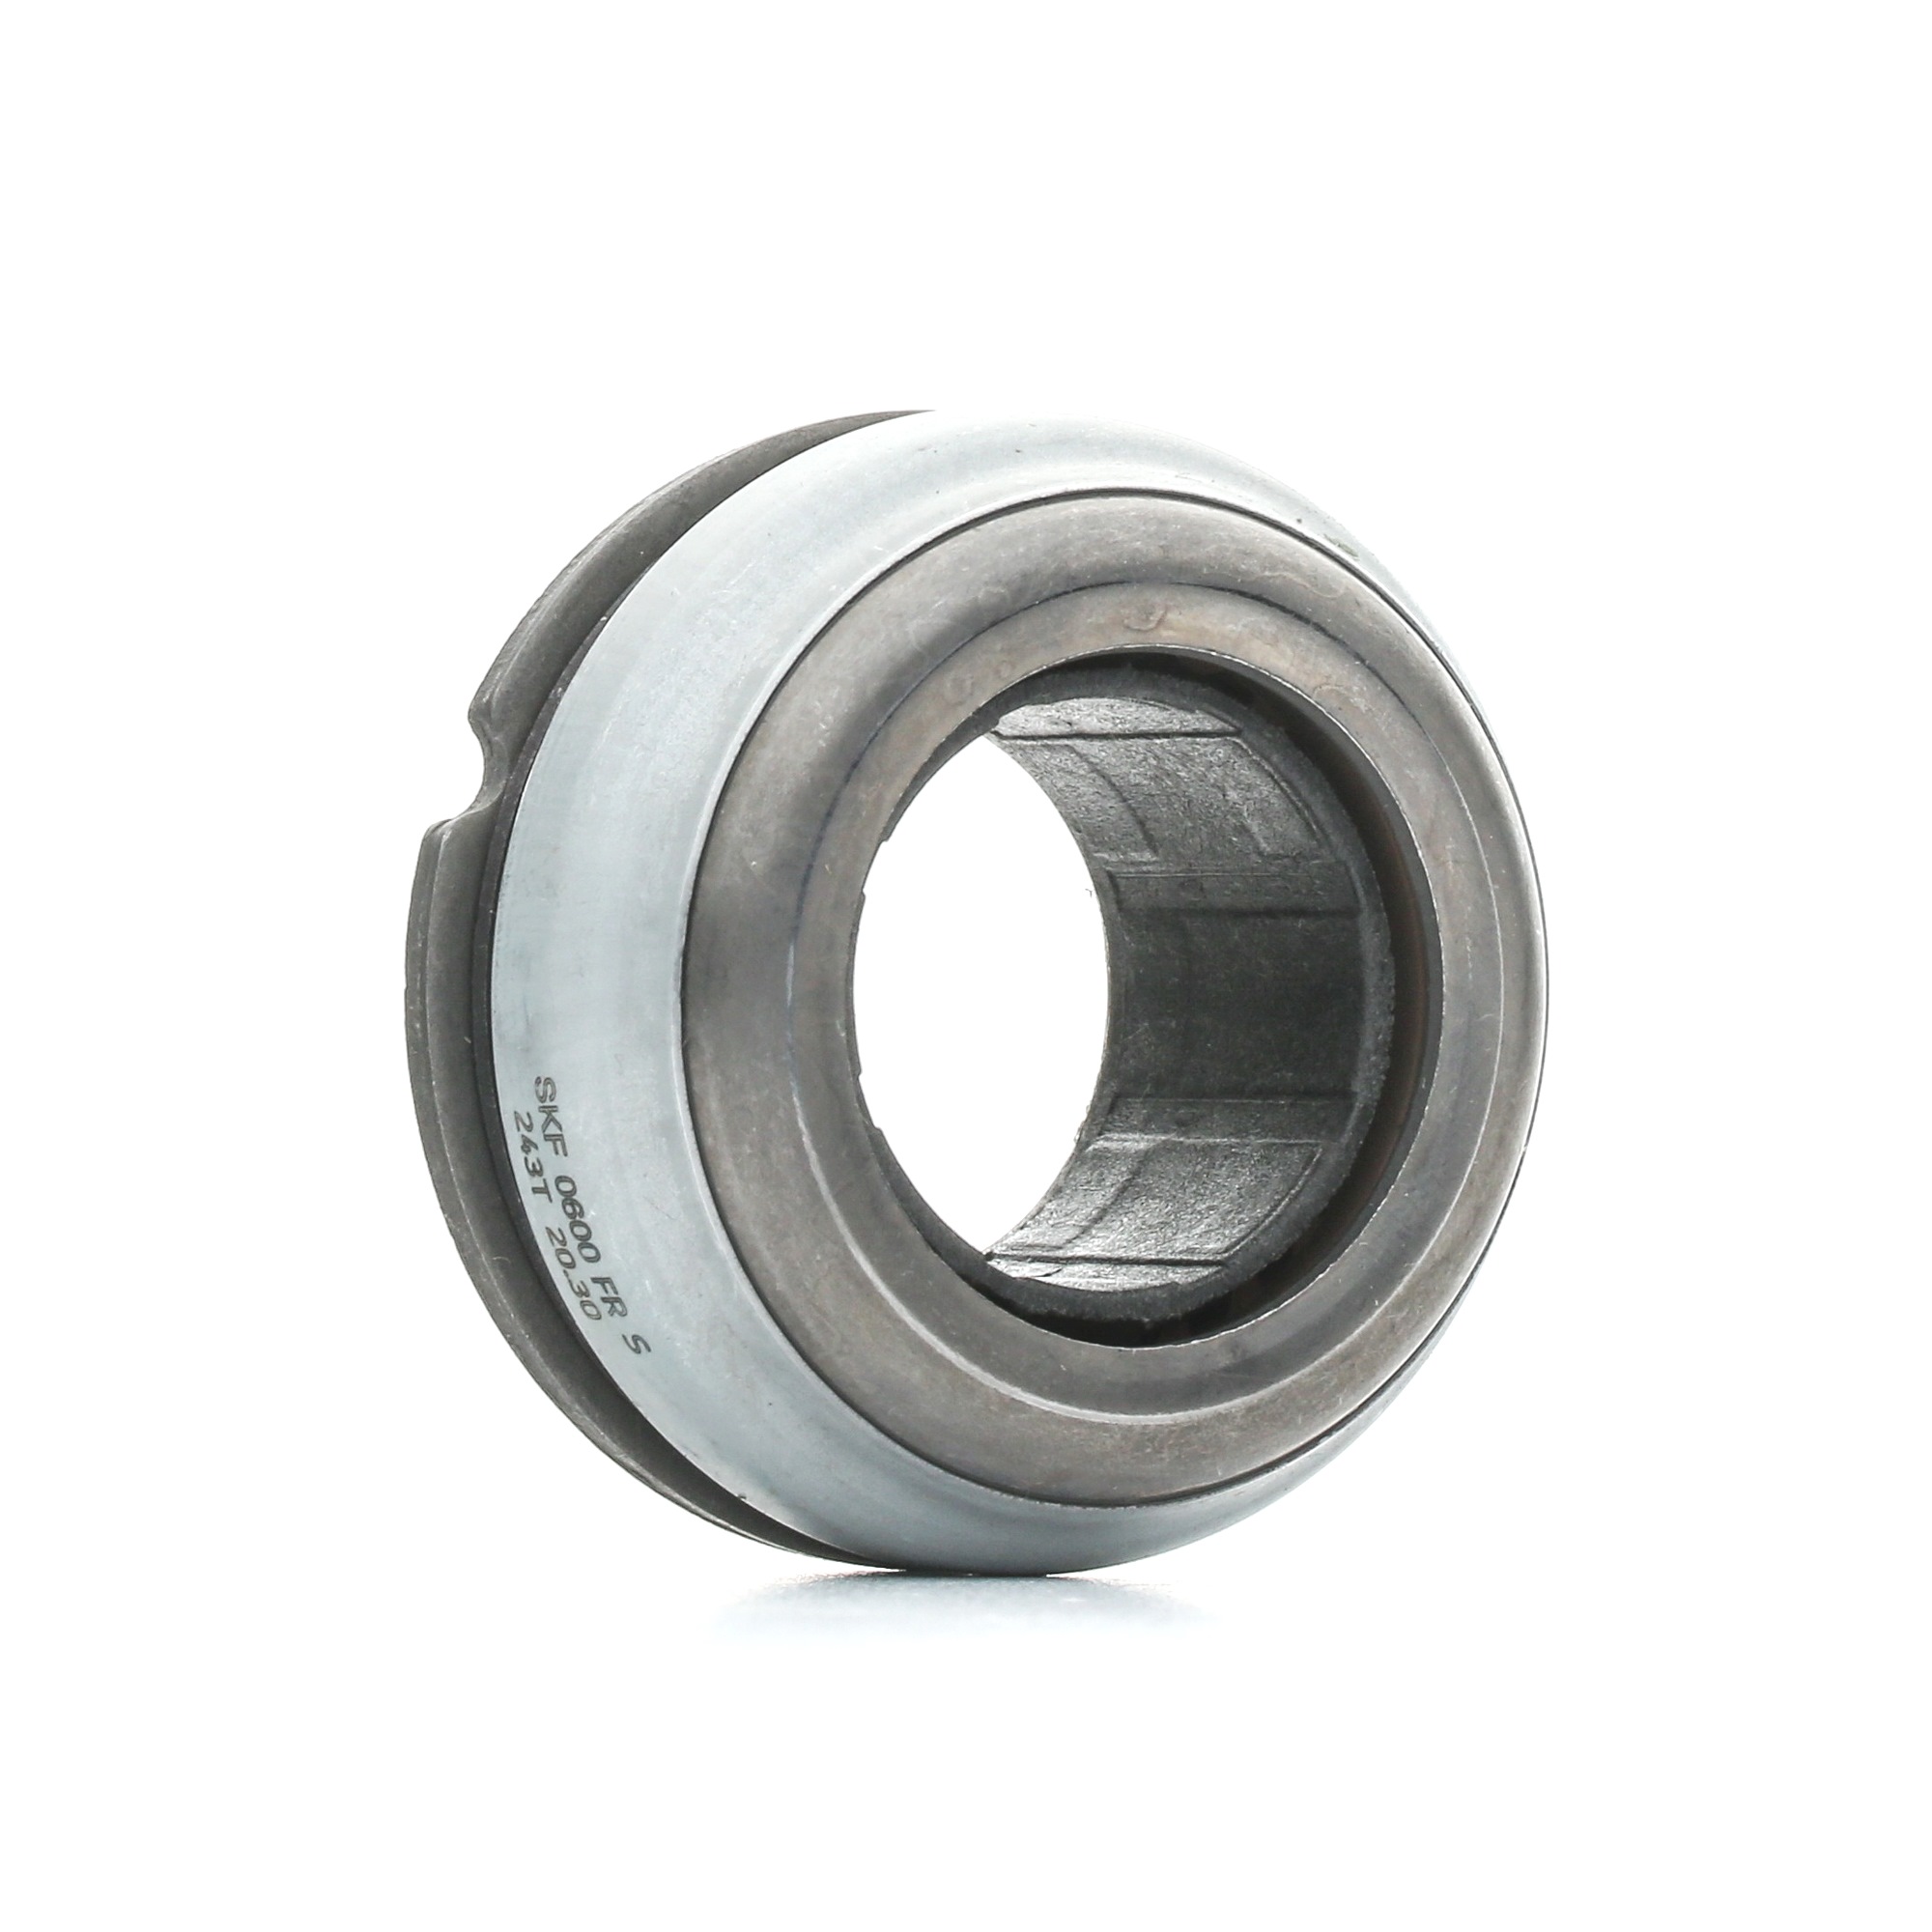 Image of SACHS Clutch Release Bearing OPEL,FIAT,PEUGEOT 3151 600 703 1611266780,204163,204194 Clutch Bearing,Release Bearing,Releaser 2041A7,9633922480,2041A7